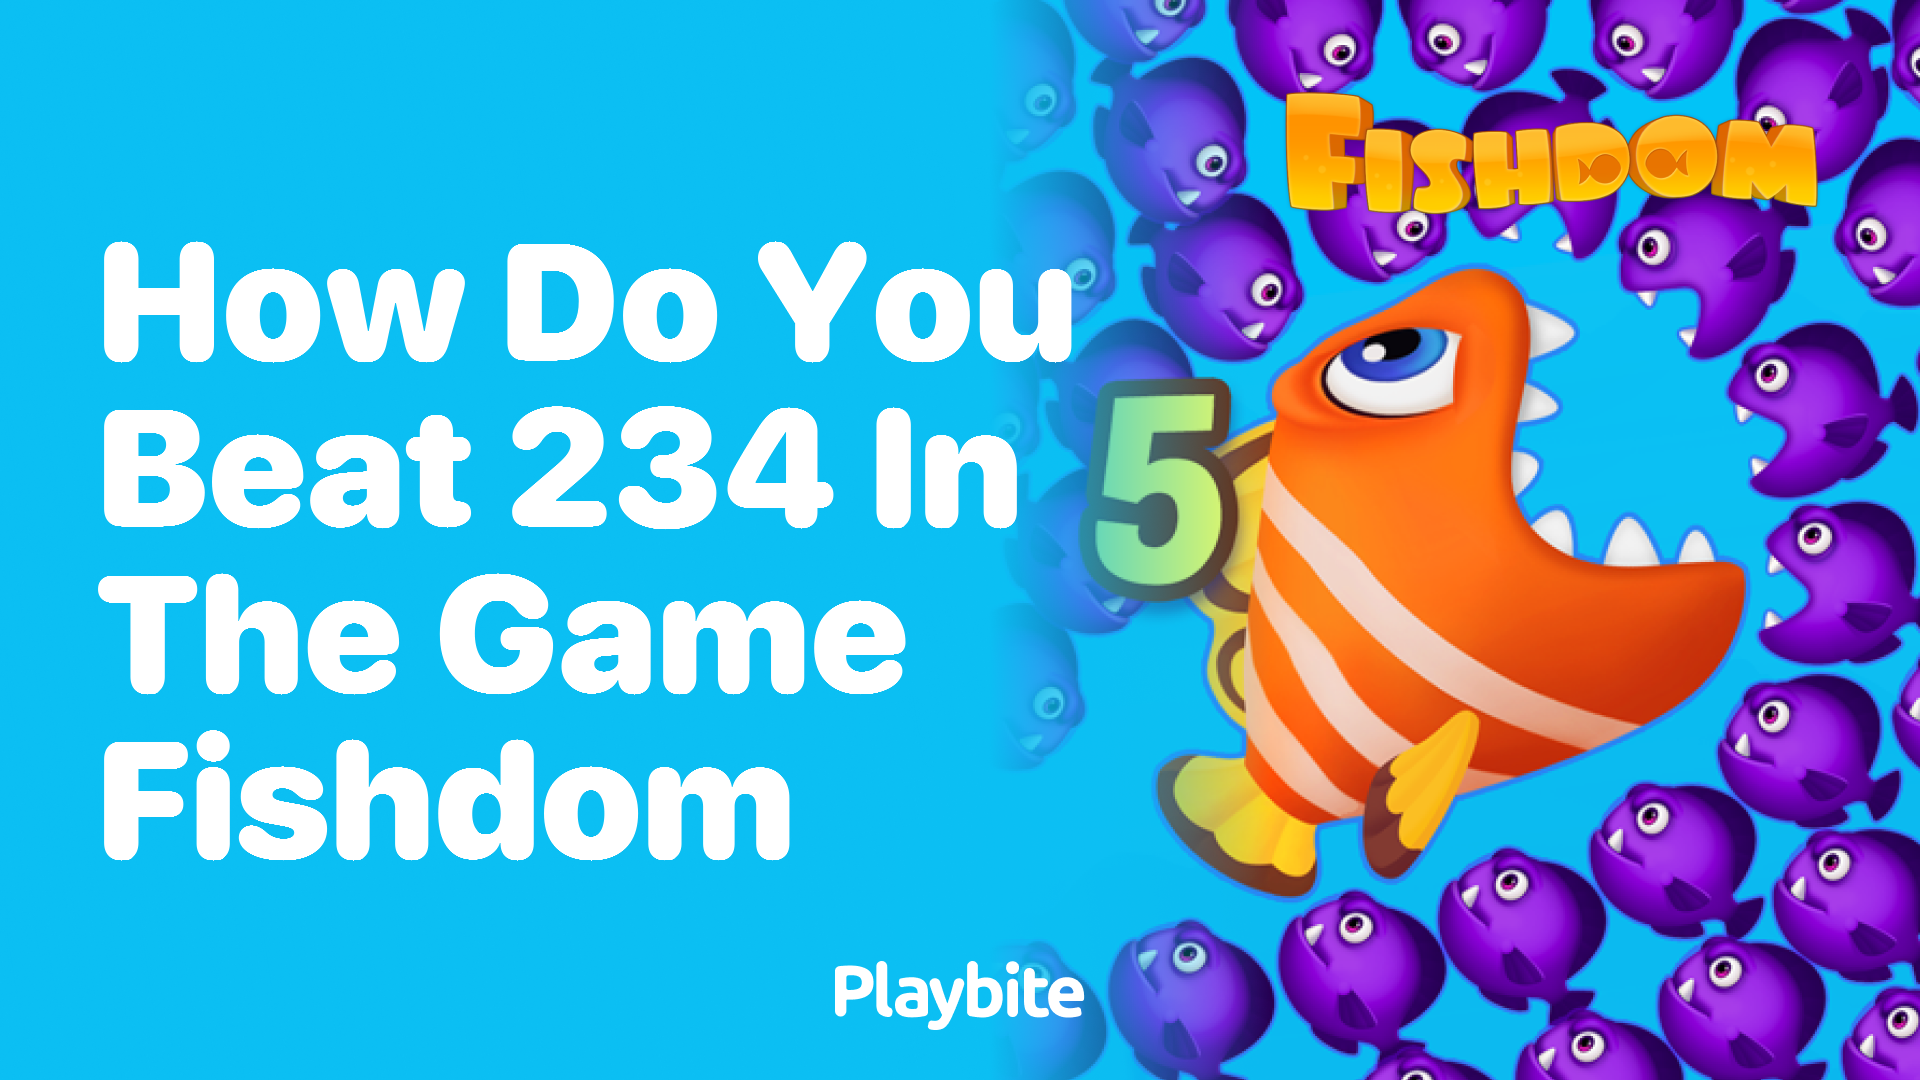 How Do You Beat Level 234 in the Game Fishdom?